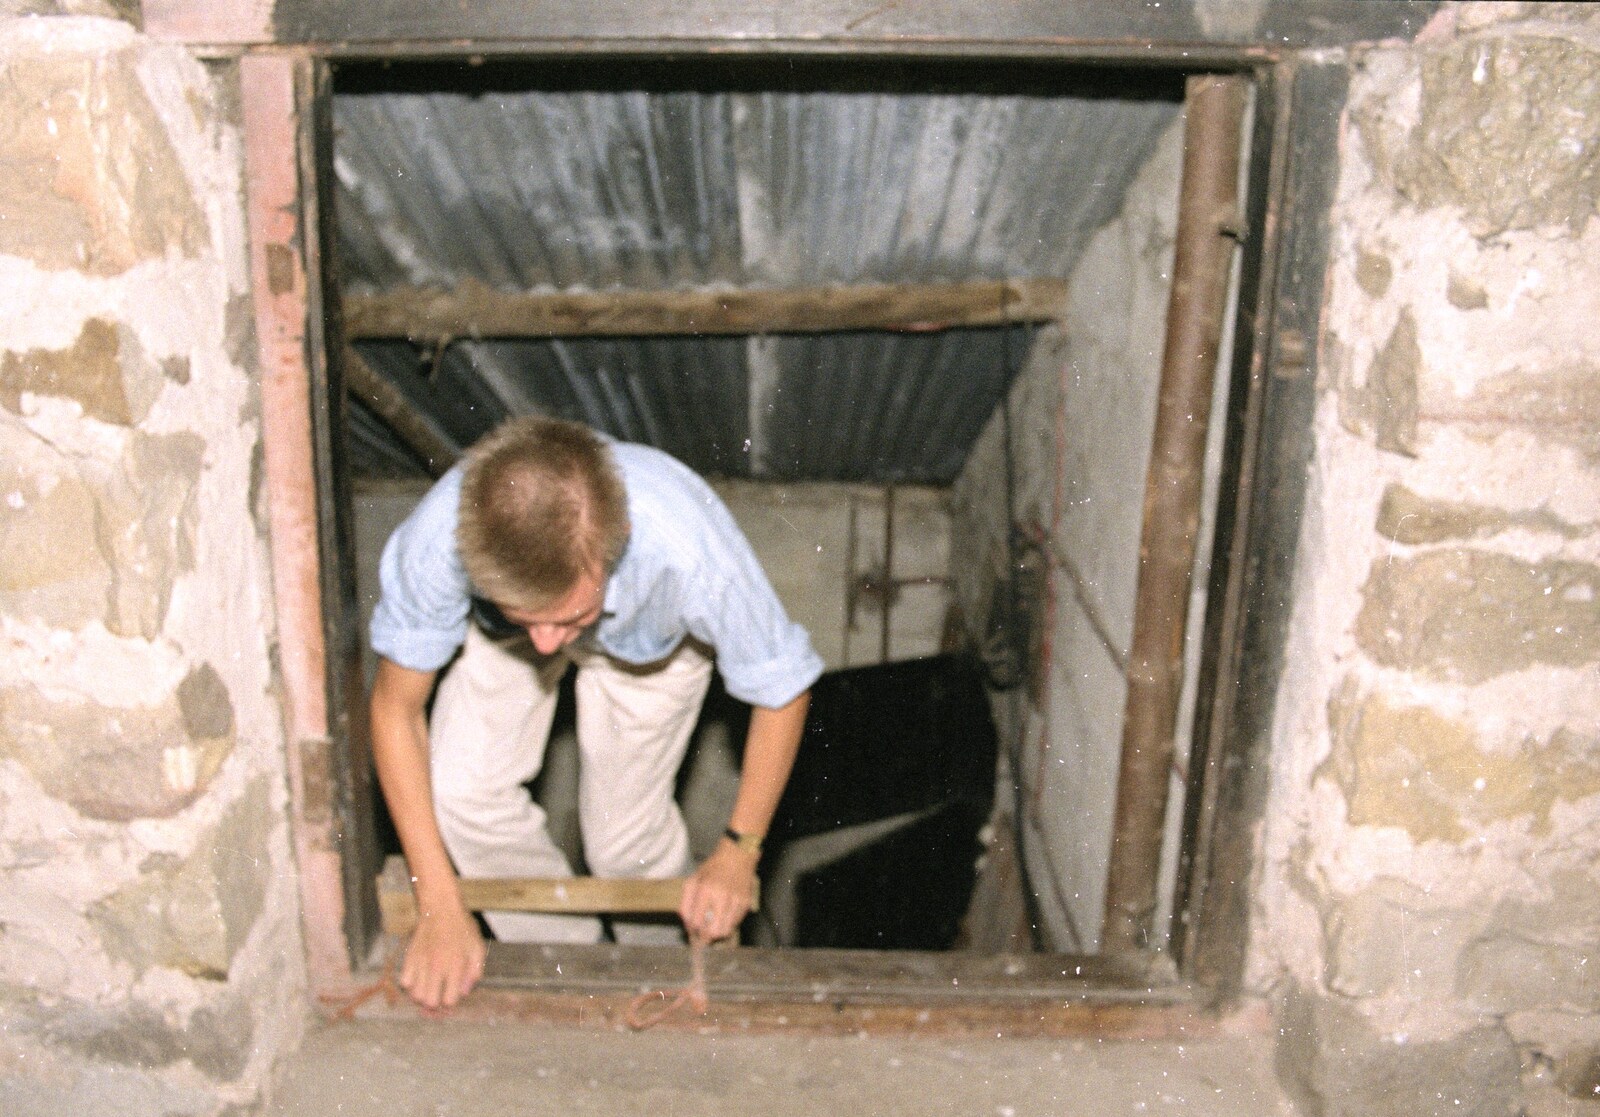 Liz's Party, Abergavenny, Monmouthshire, Wales - 4th August 1990: Nosher is caught escaping a cellar